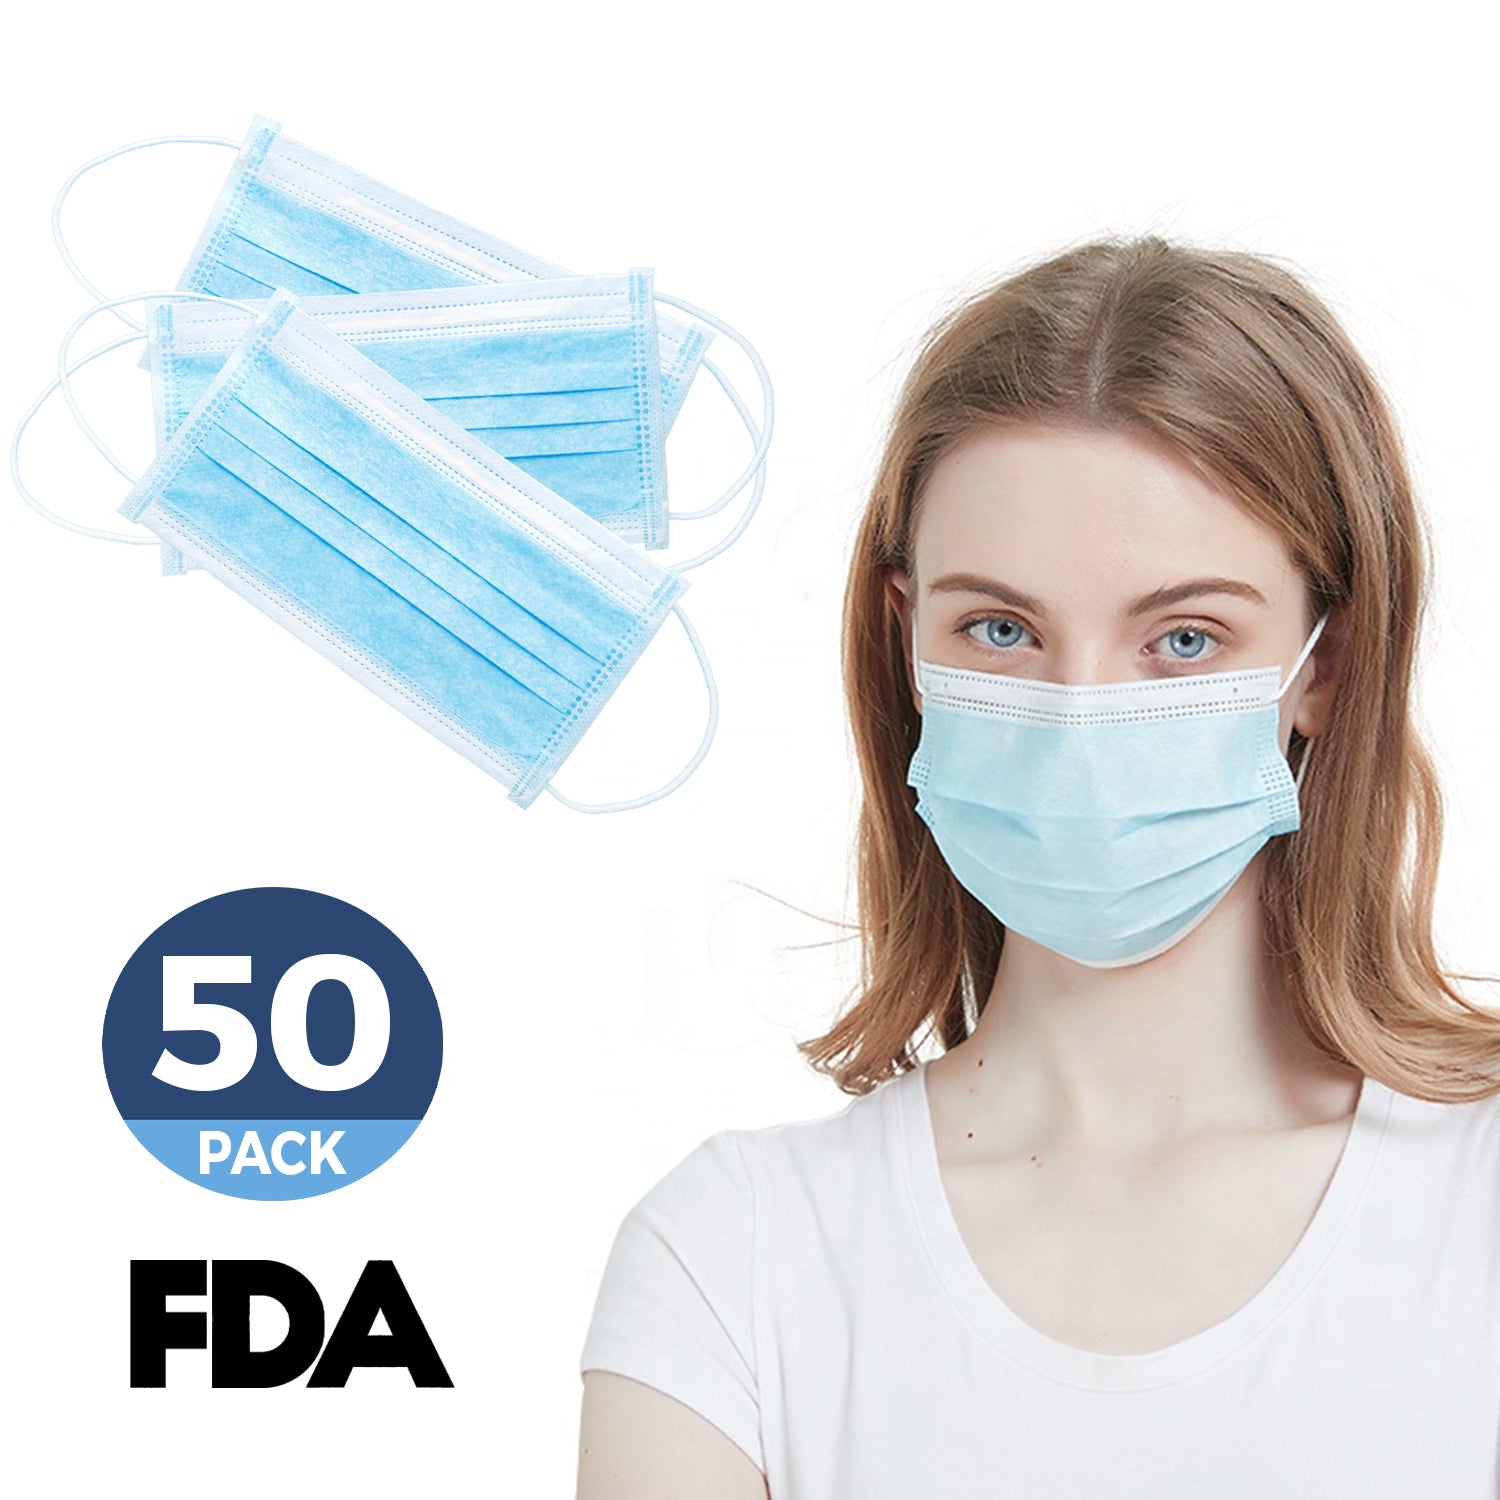 Disposable Face Mask – FDA Registered, 3-Layered (50 Pack) – Canopus USA